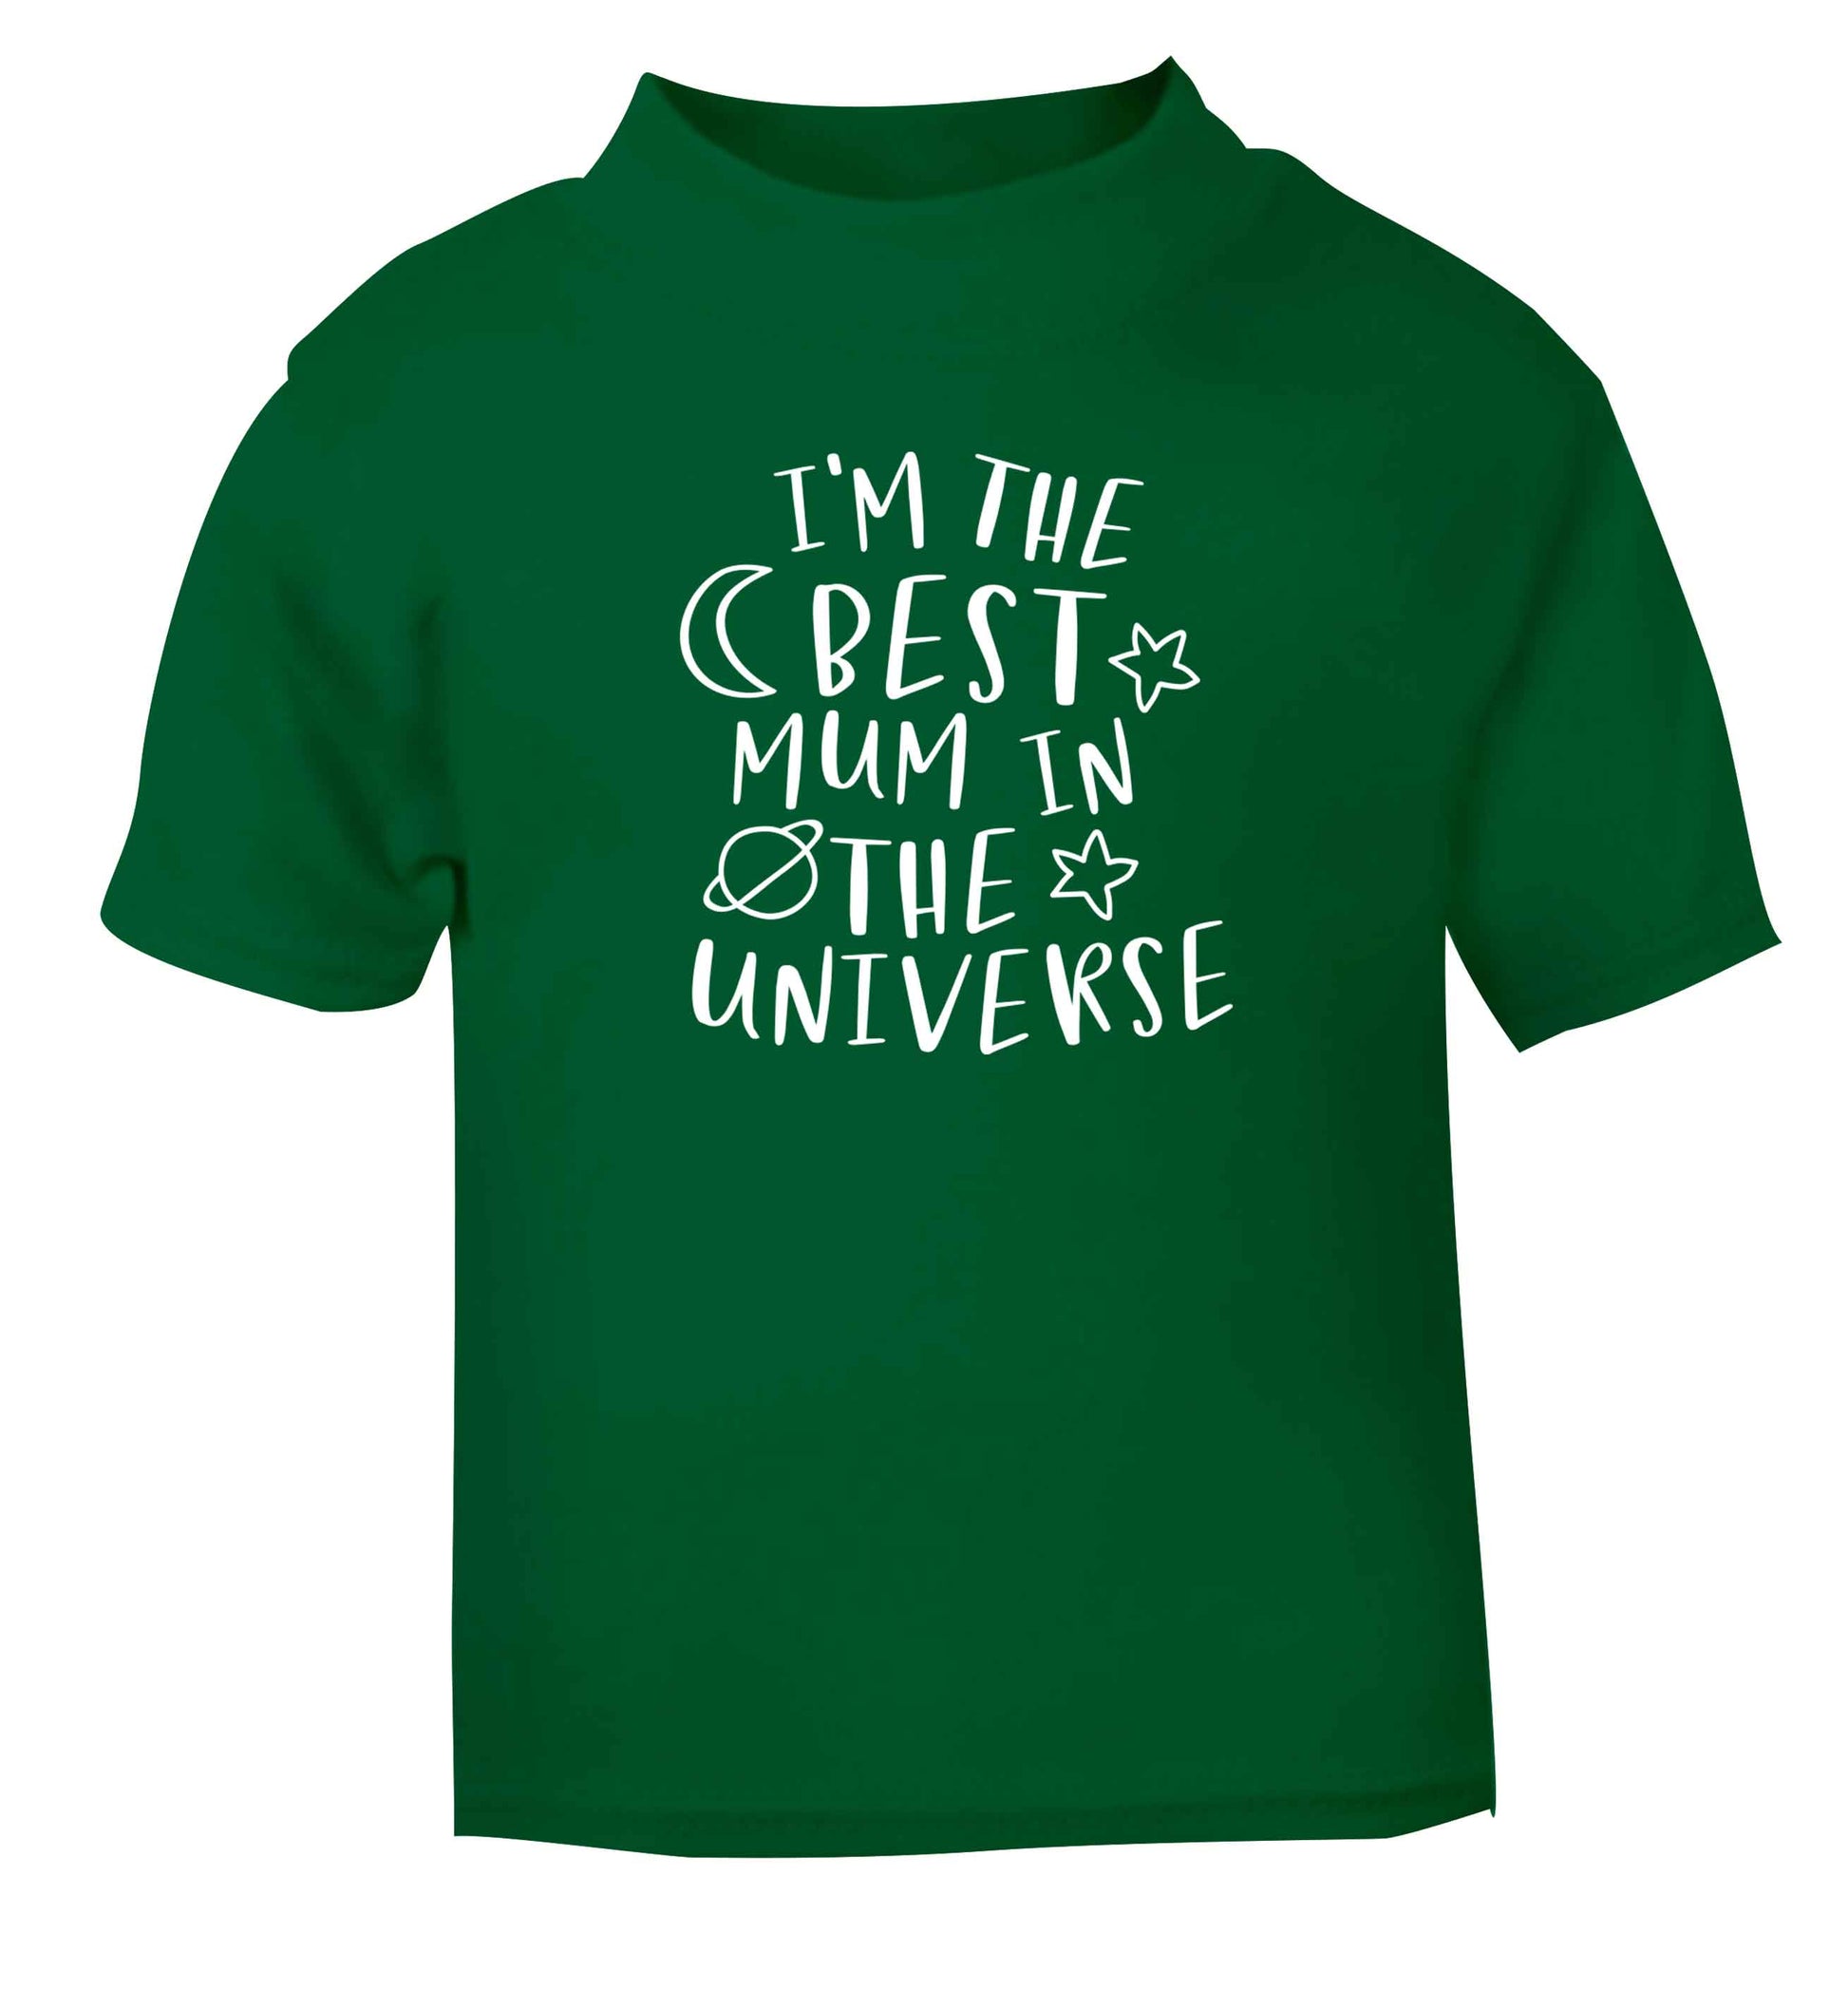 I'm the best mum in the universe green baby toddler Tshirt 2 Years